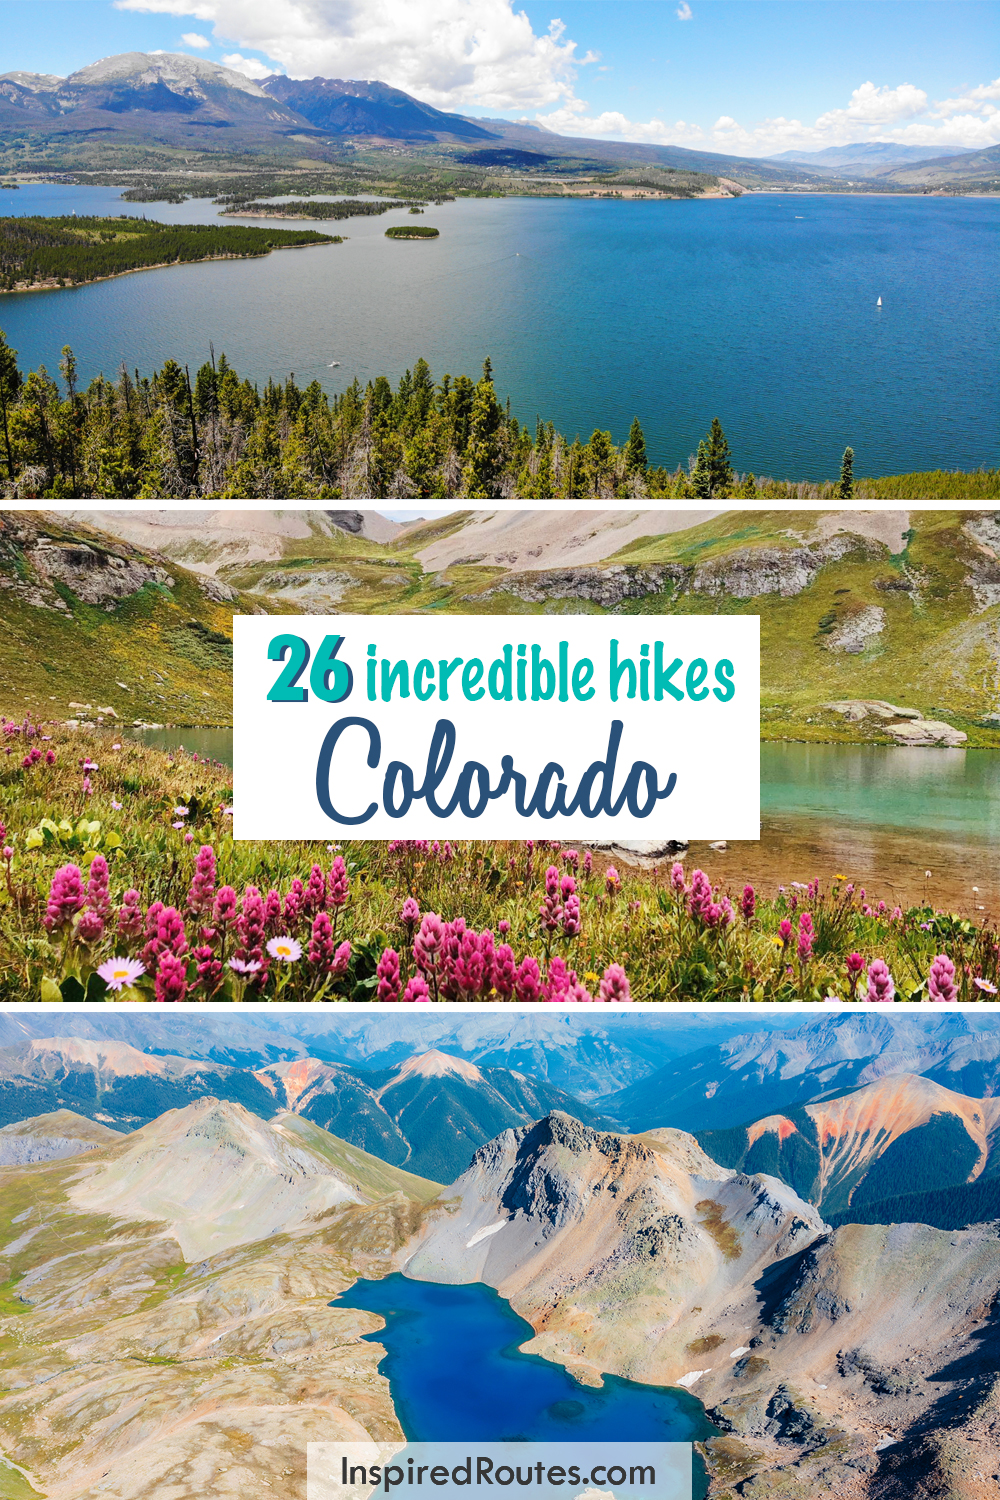 26 incredible hikes colorado with photos of blue lake, pink flowers and rugged mountain scenes